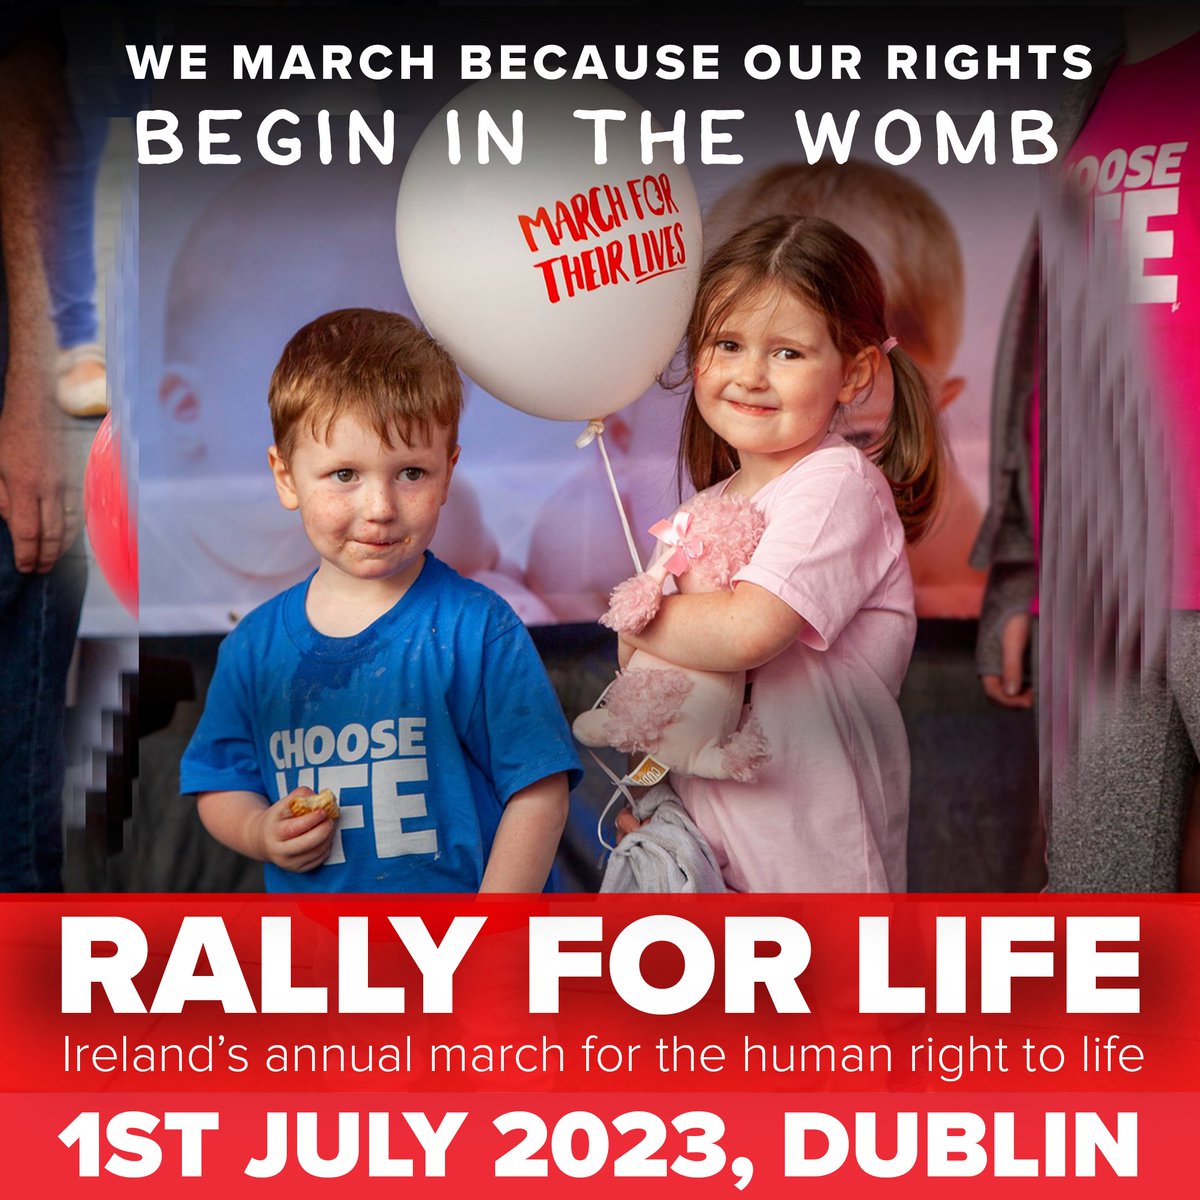 #Ireland it's time!

This Saturday, join thousands of pro-lifers as we take a stand against abortion violence in Ireland.

Meeting at 1.30pm, Garden of Remembrance, Parnell Square Dublin.

#RFL2023 #WhyWeMarch #StopAbortingOurFuture #RallyforLife